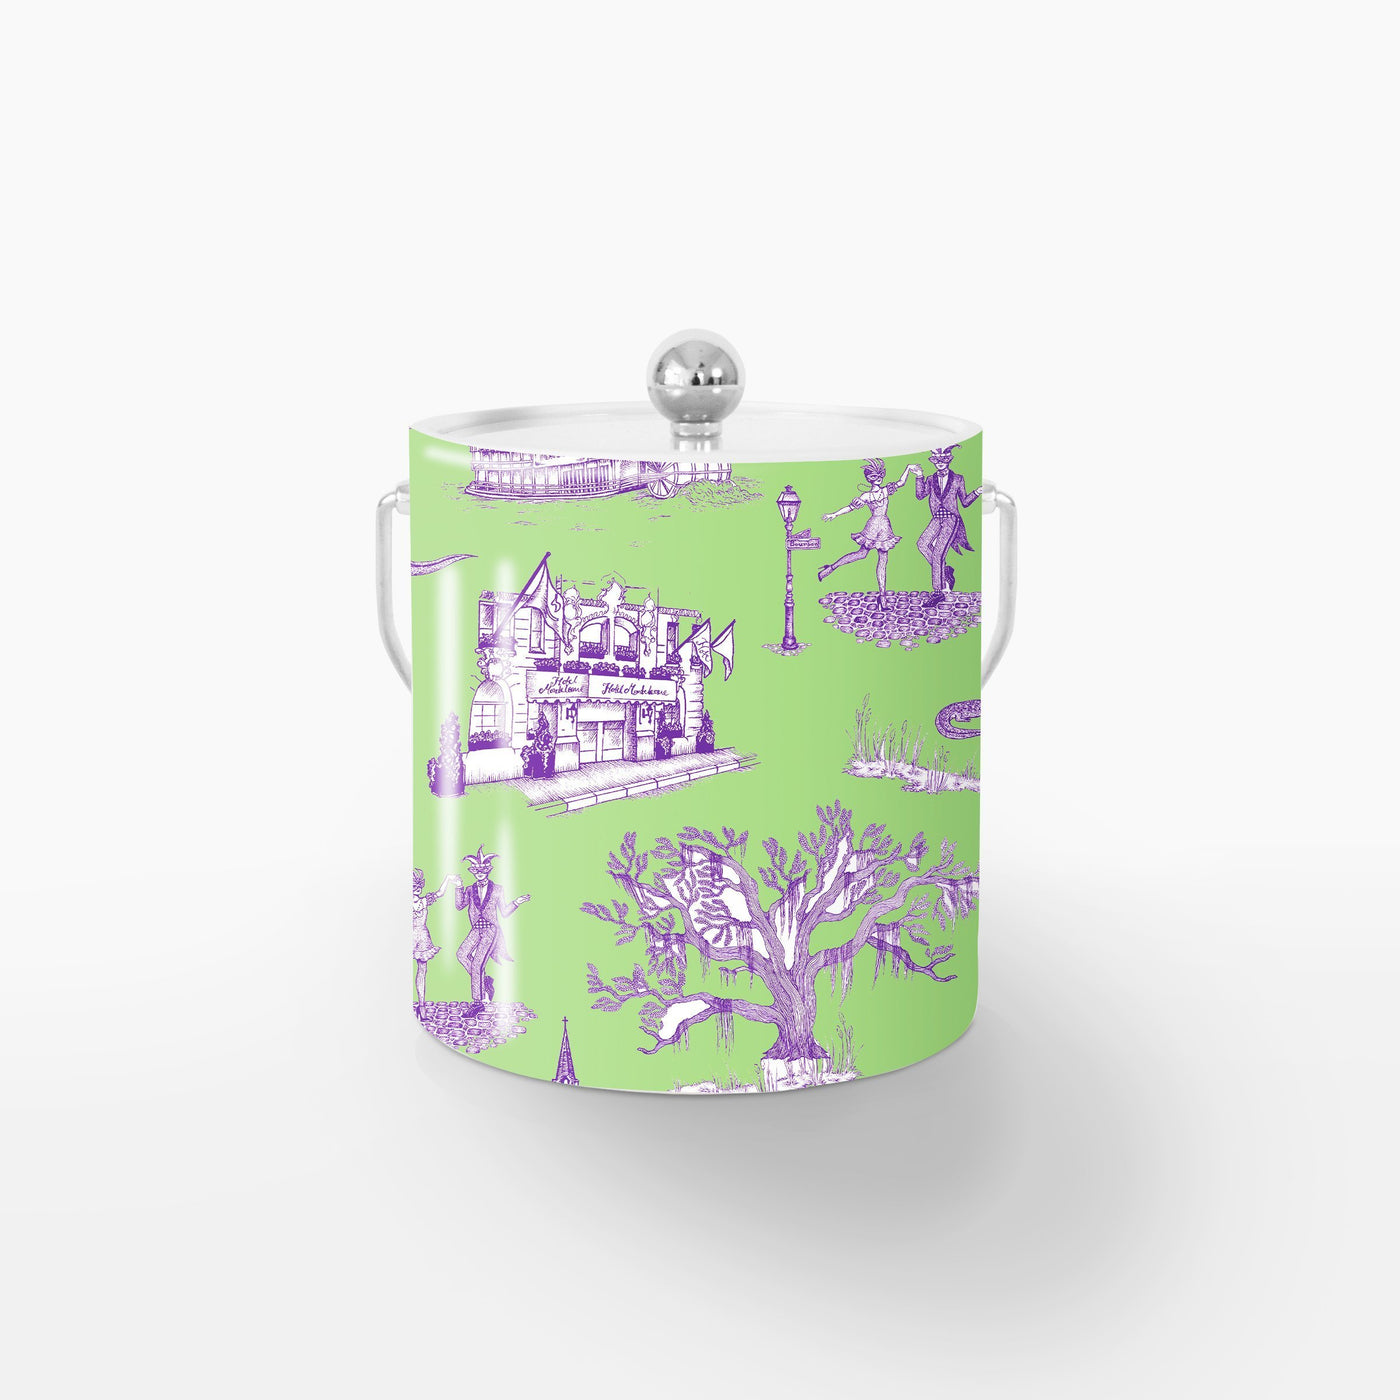 New Orleans Toile Ice Bucket Ice Bucket Green Lavender / Silver Katie Kime